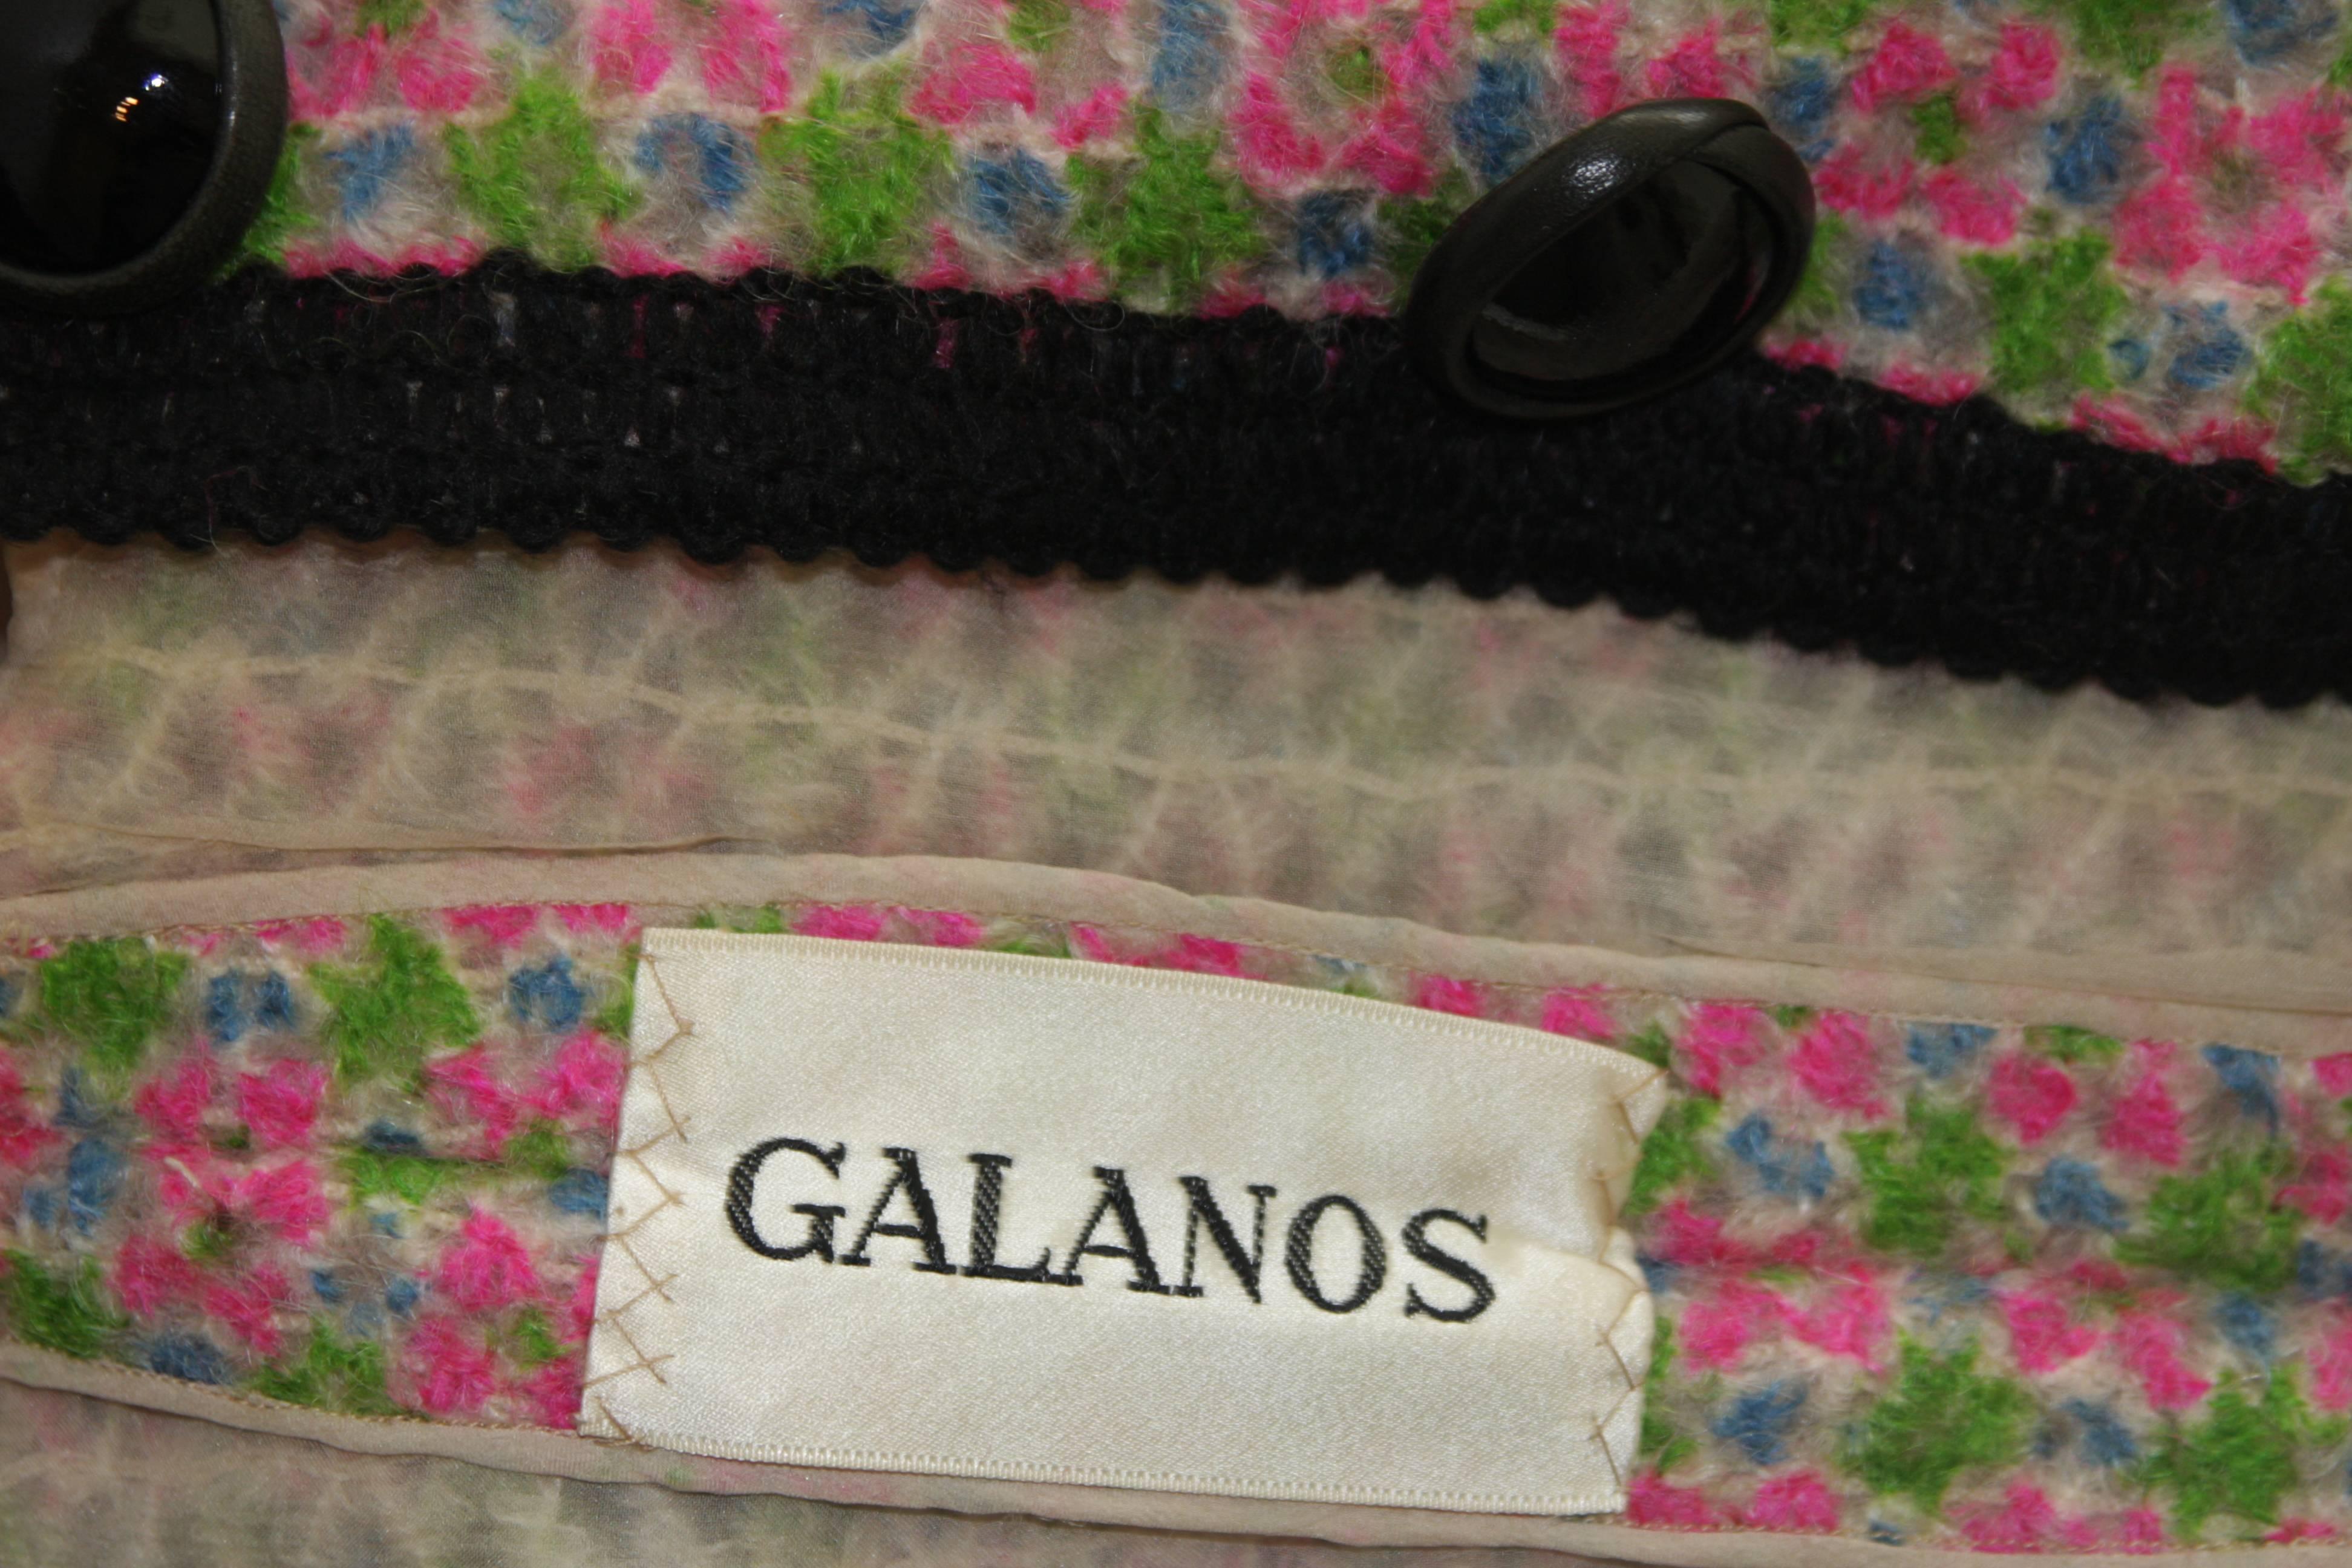 Galanos Wool Skirt Suit in Green Pink White and Black Size Small Medium For Sale 2